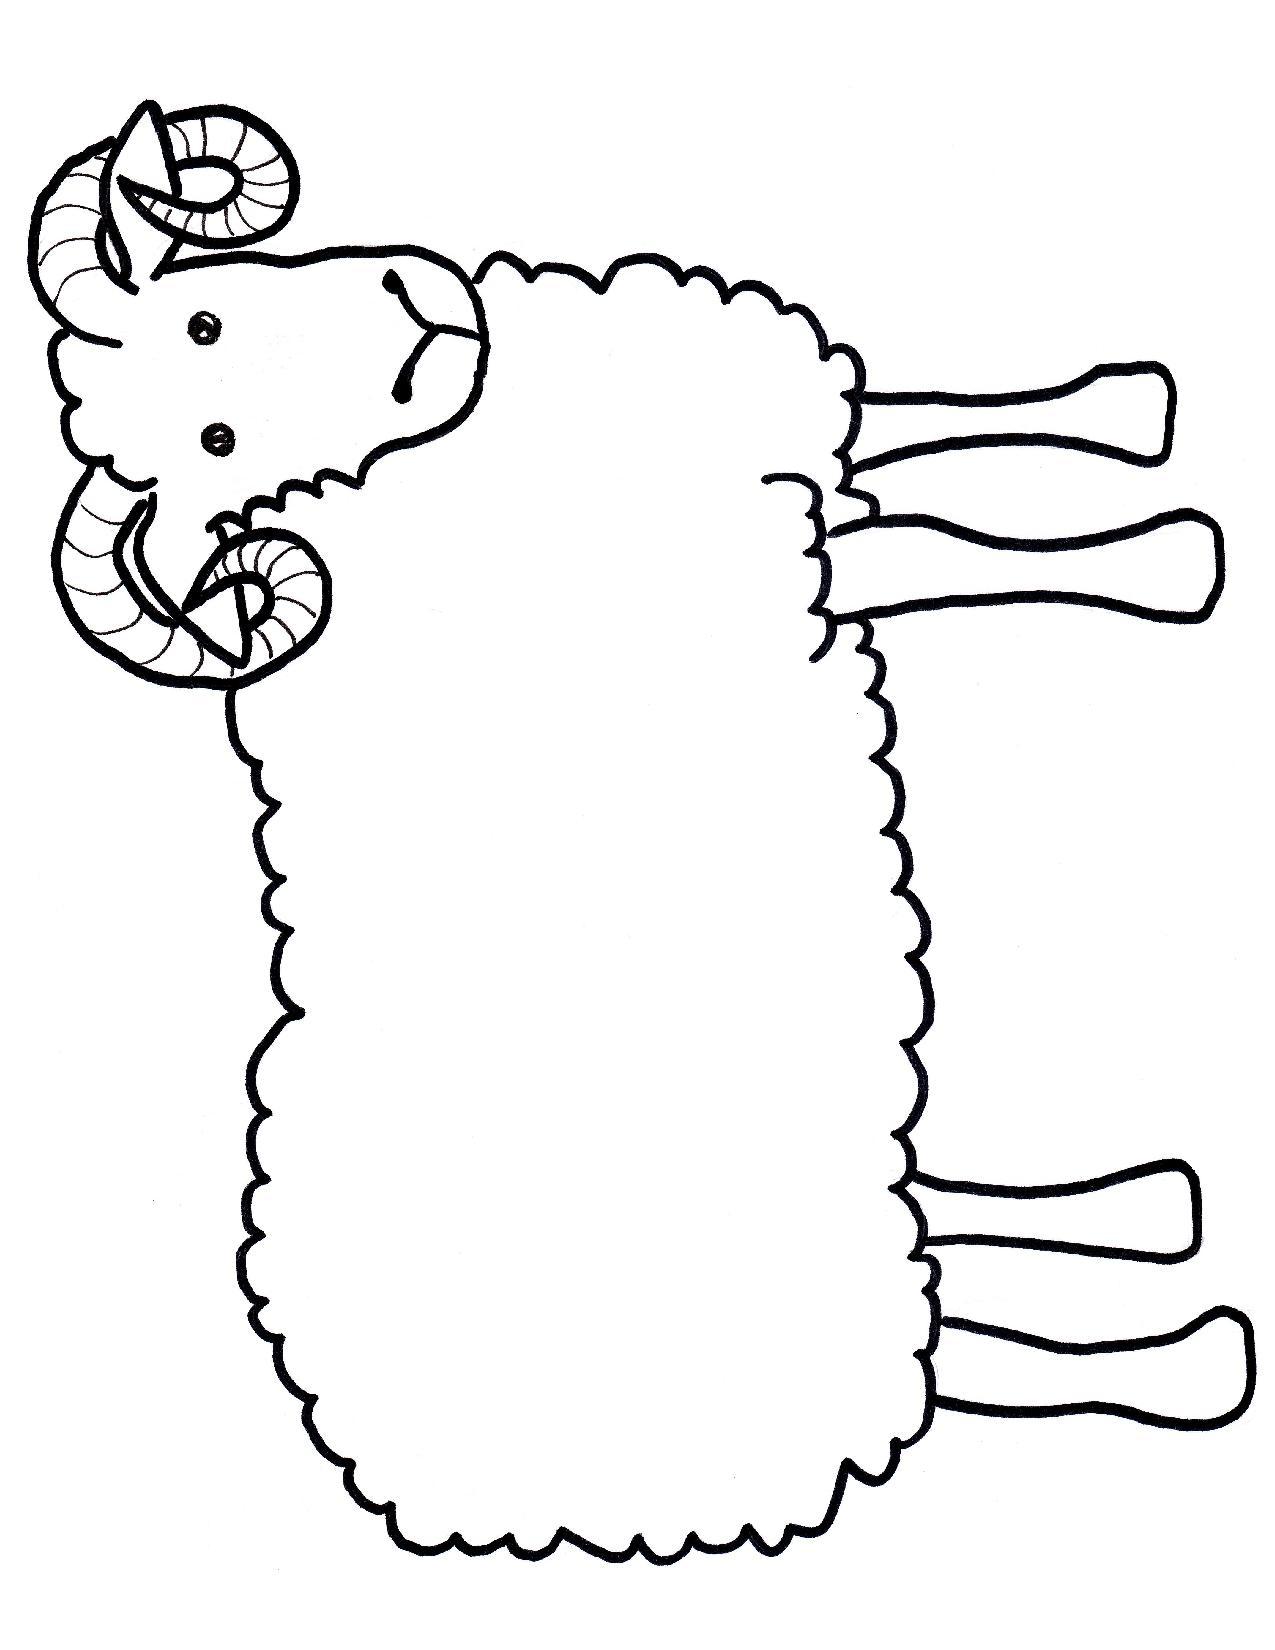 Sheep Outline Coloring Page - AZ Coloring Pages